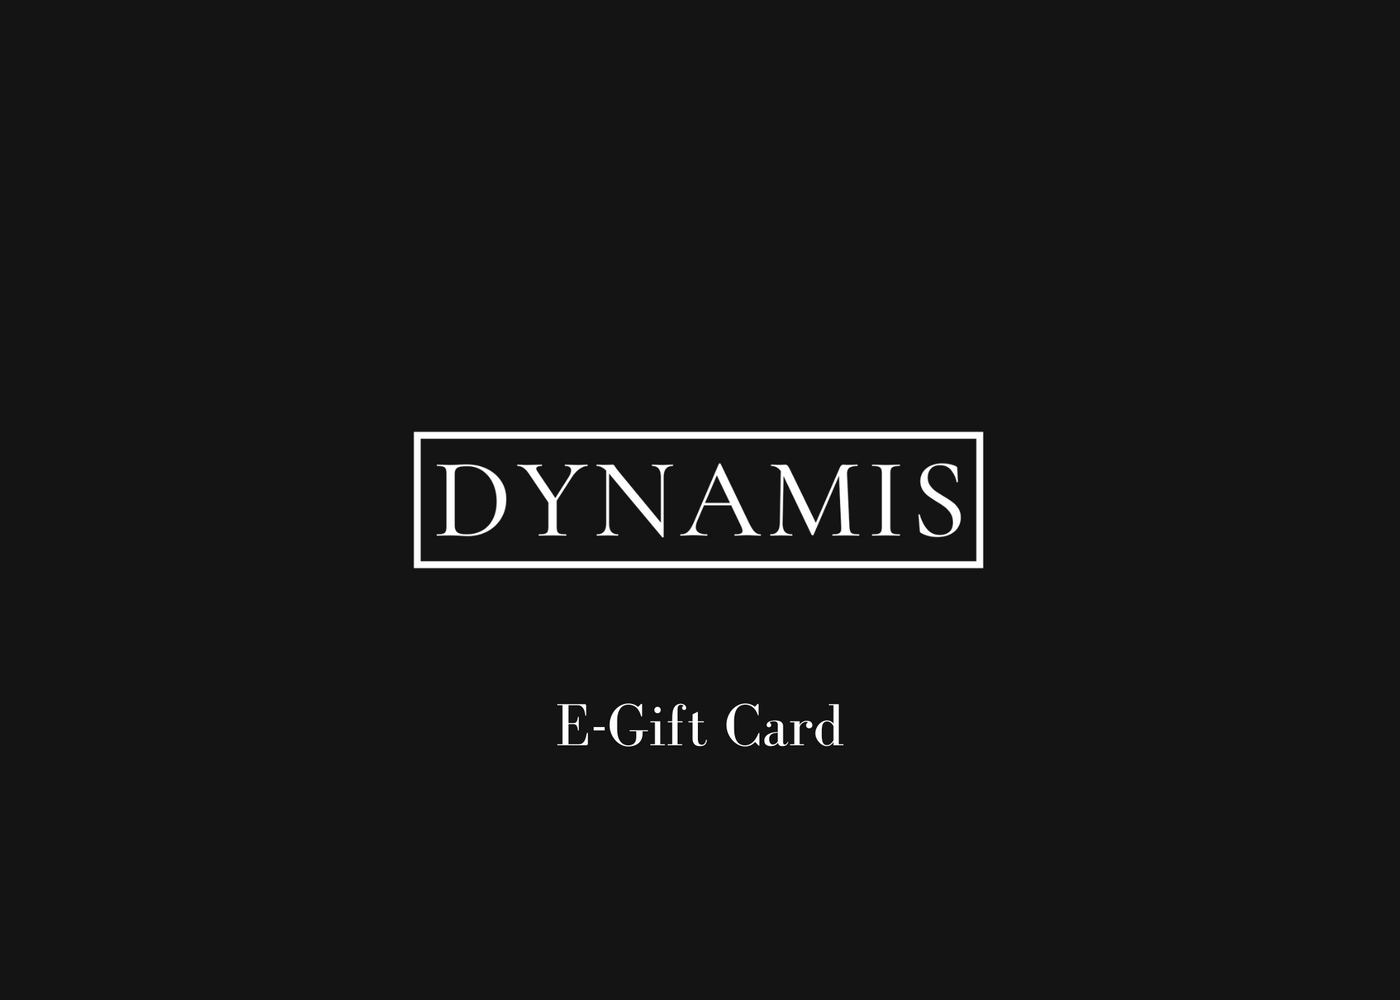 Dynamis Jewelry E-Gift Card